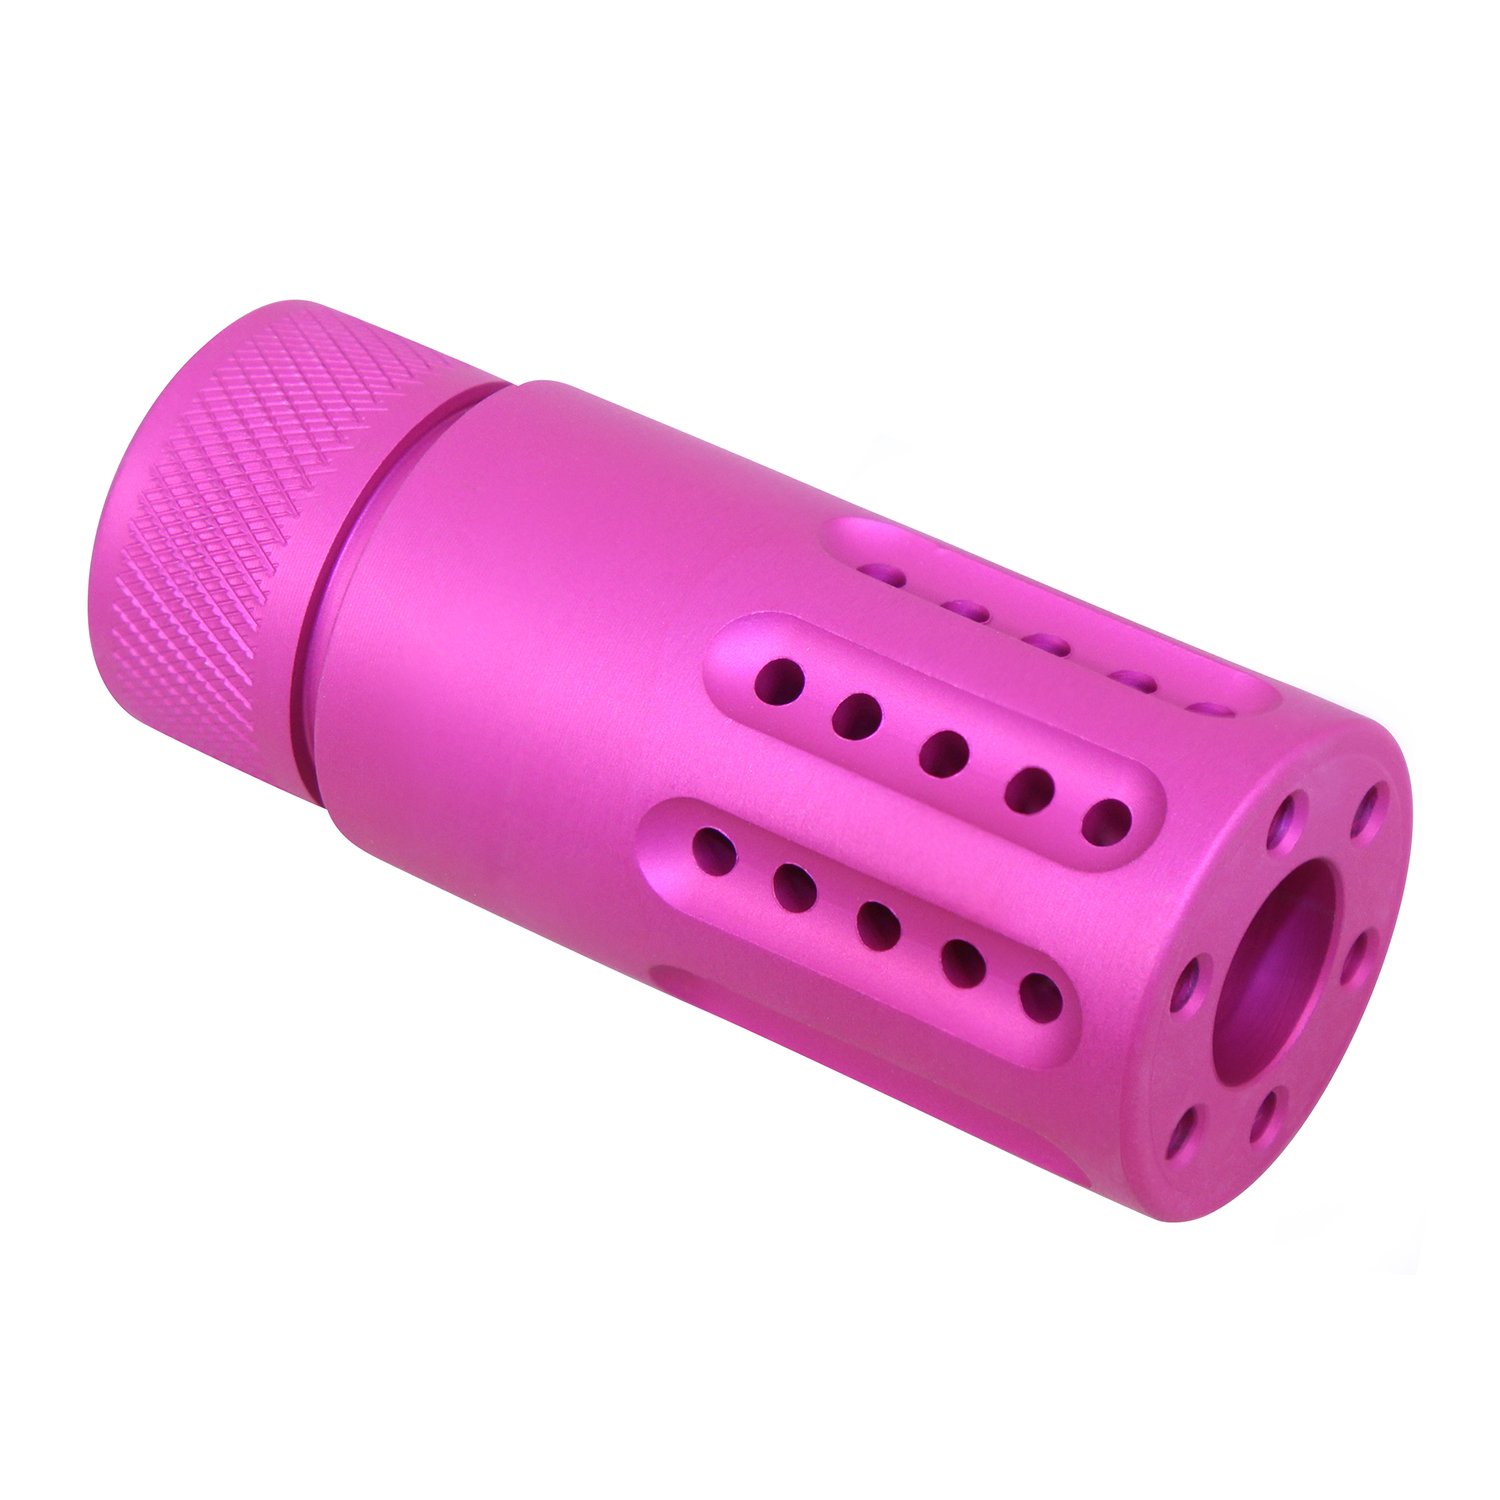 Micro AR-15 muzzle brake with ported design in an anodized bright pink finish